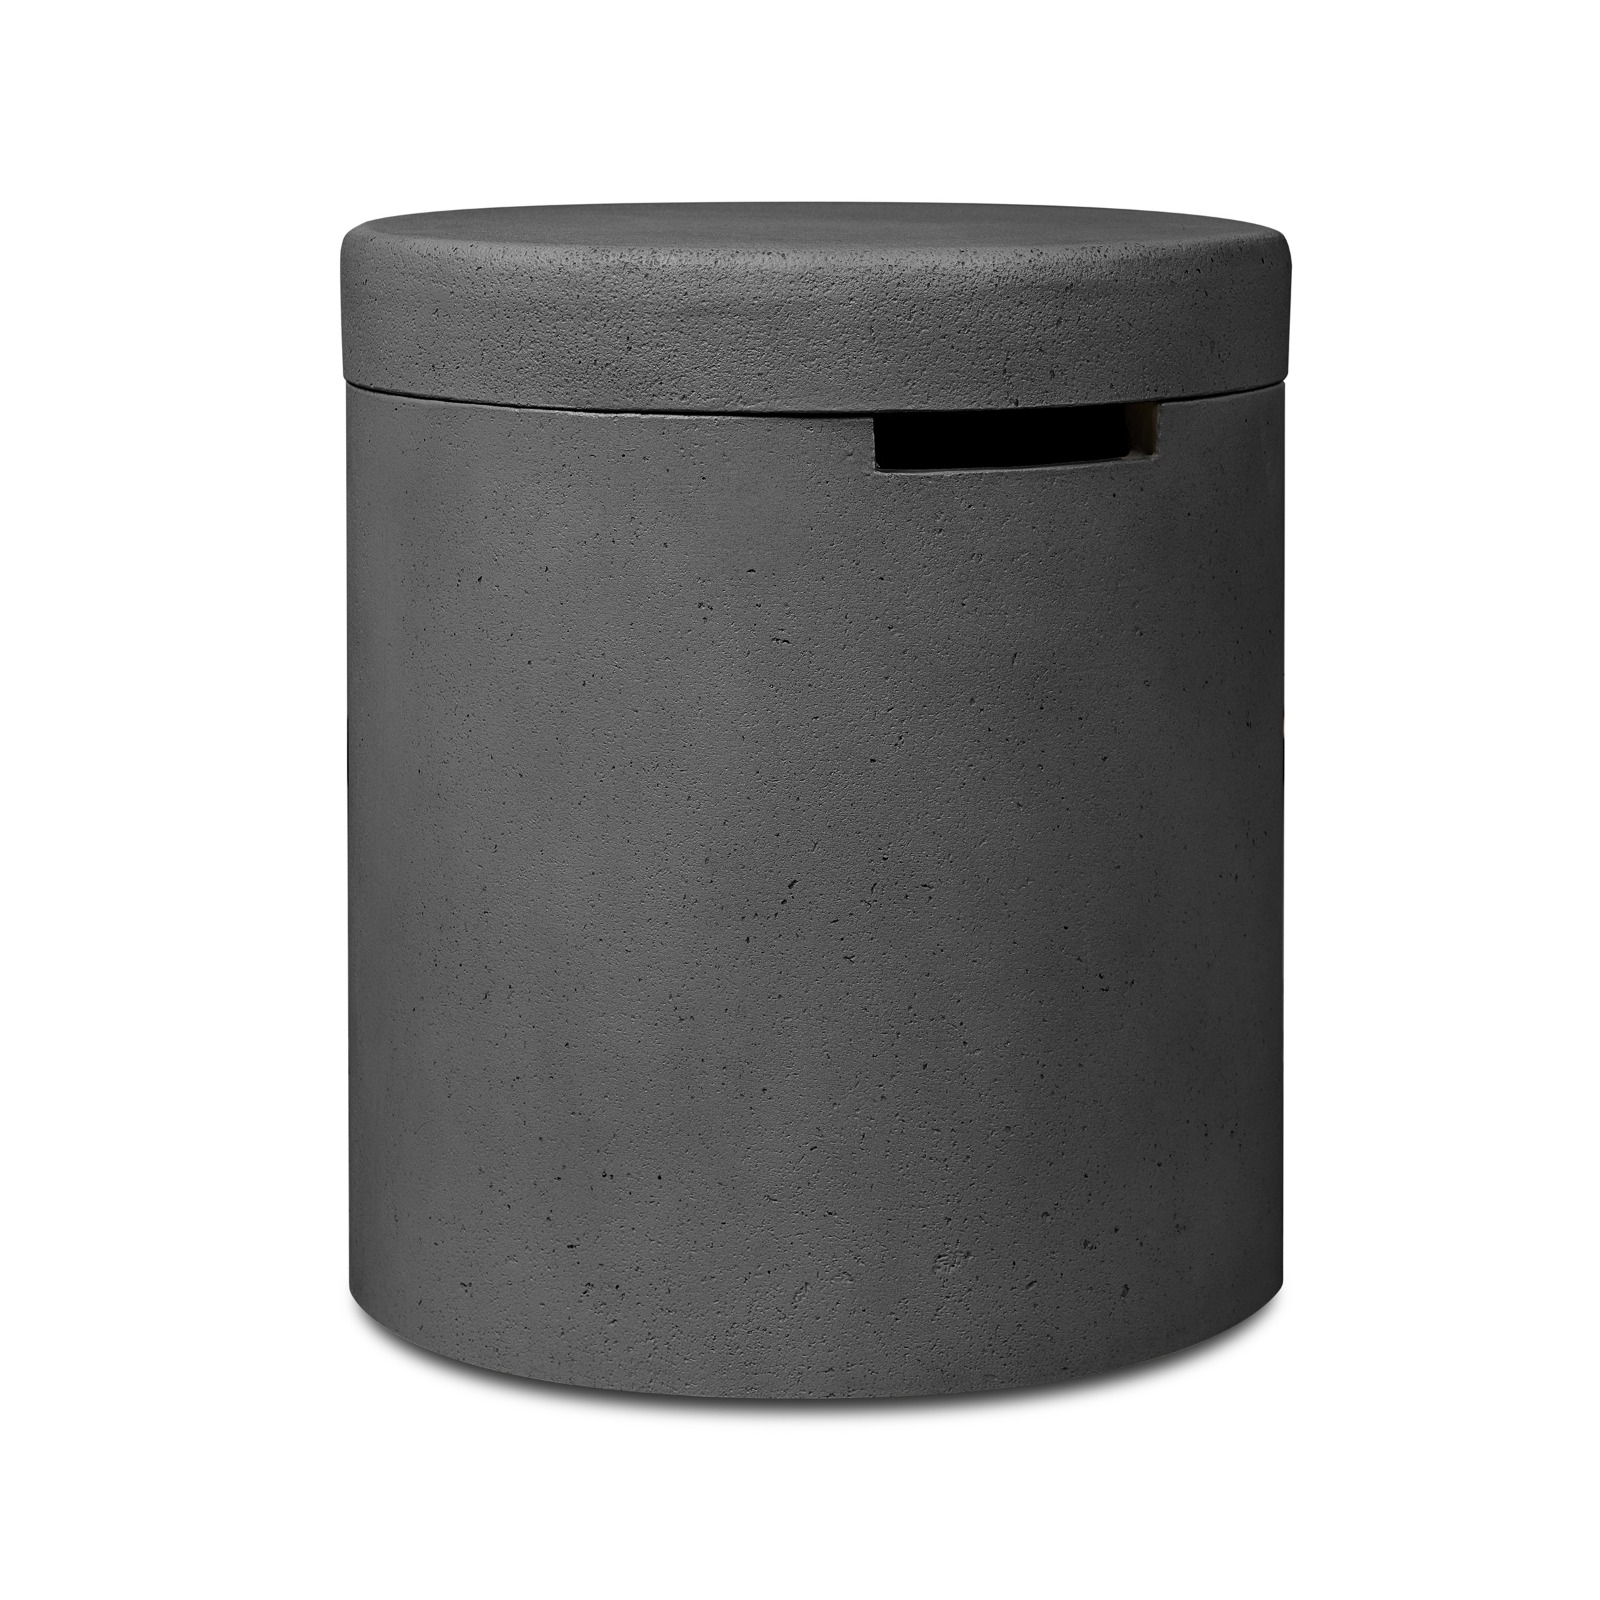 Gray Propane Tank Cover for La Valle Outdoor Propane Gas Fire Pit